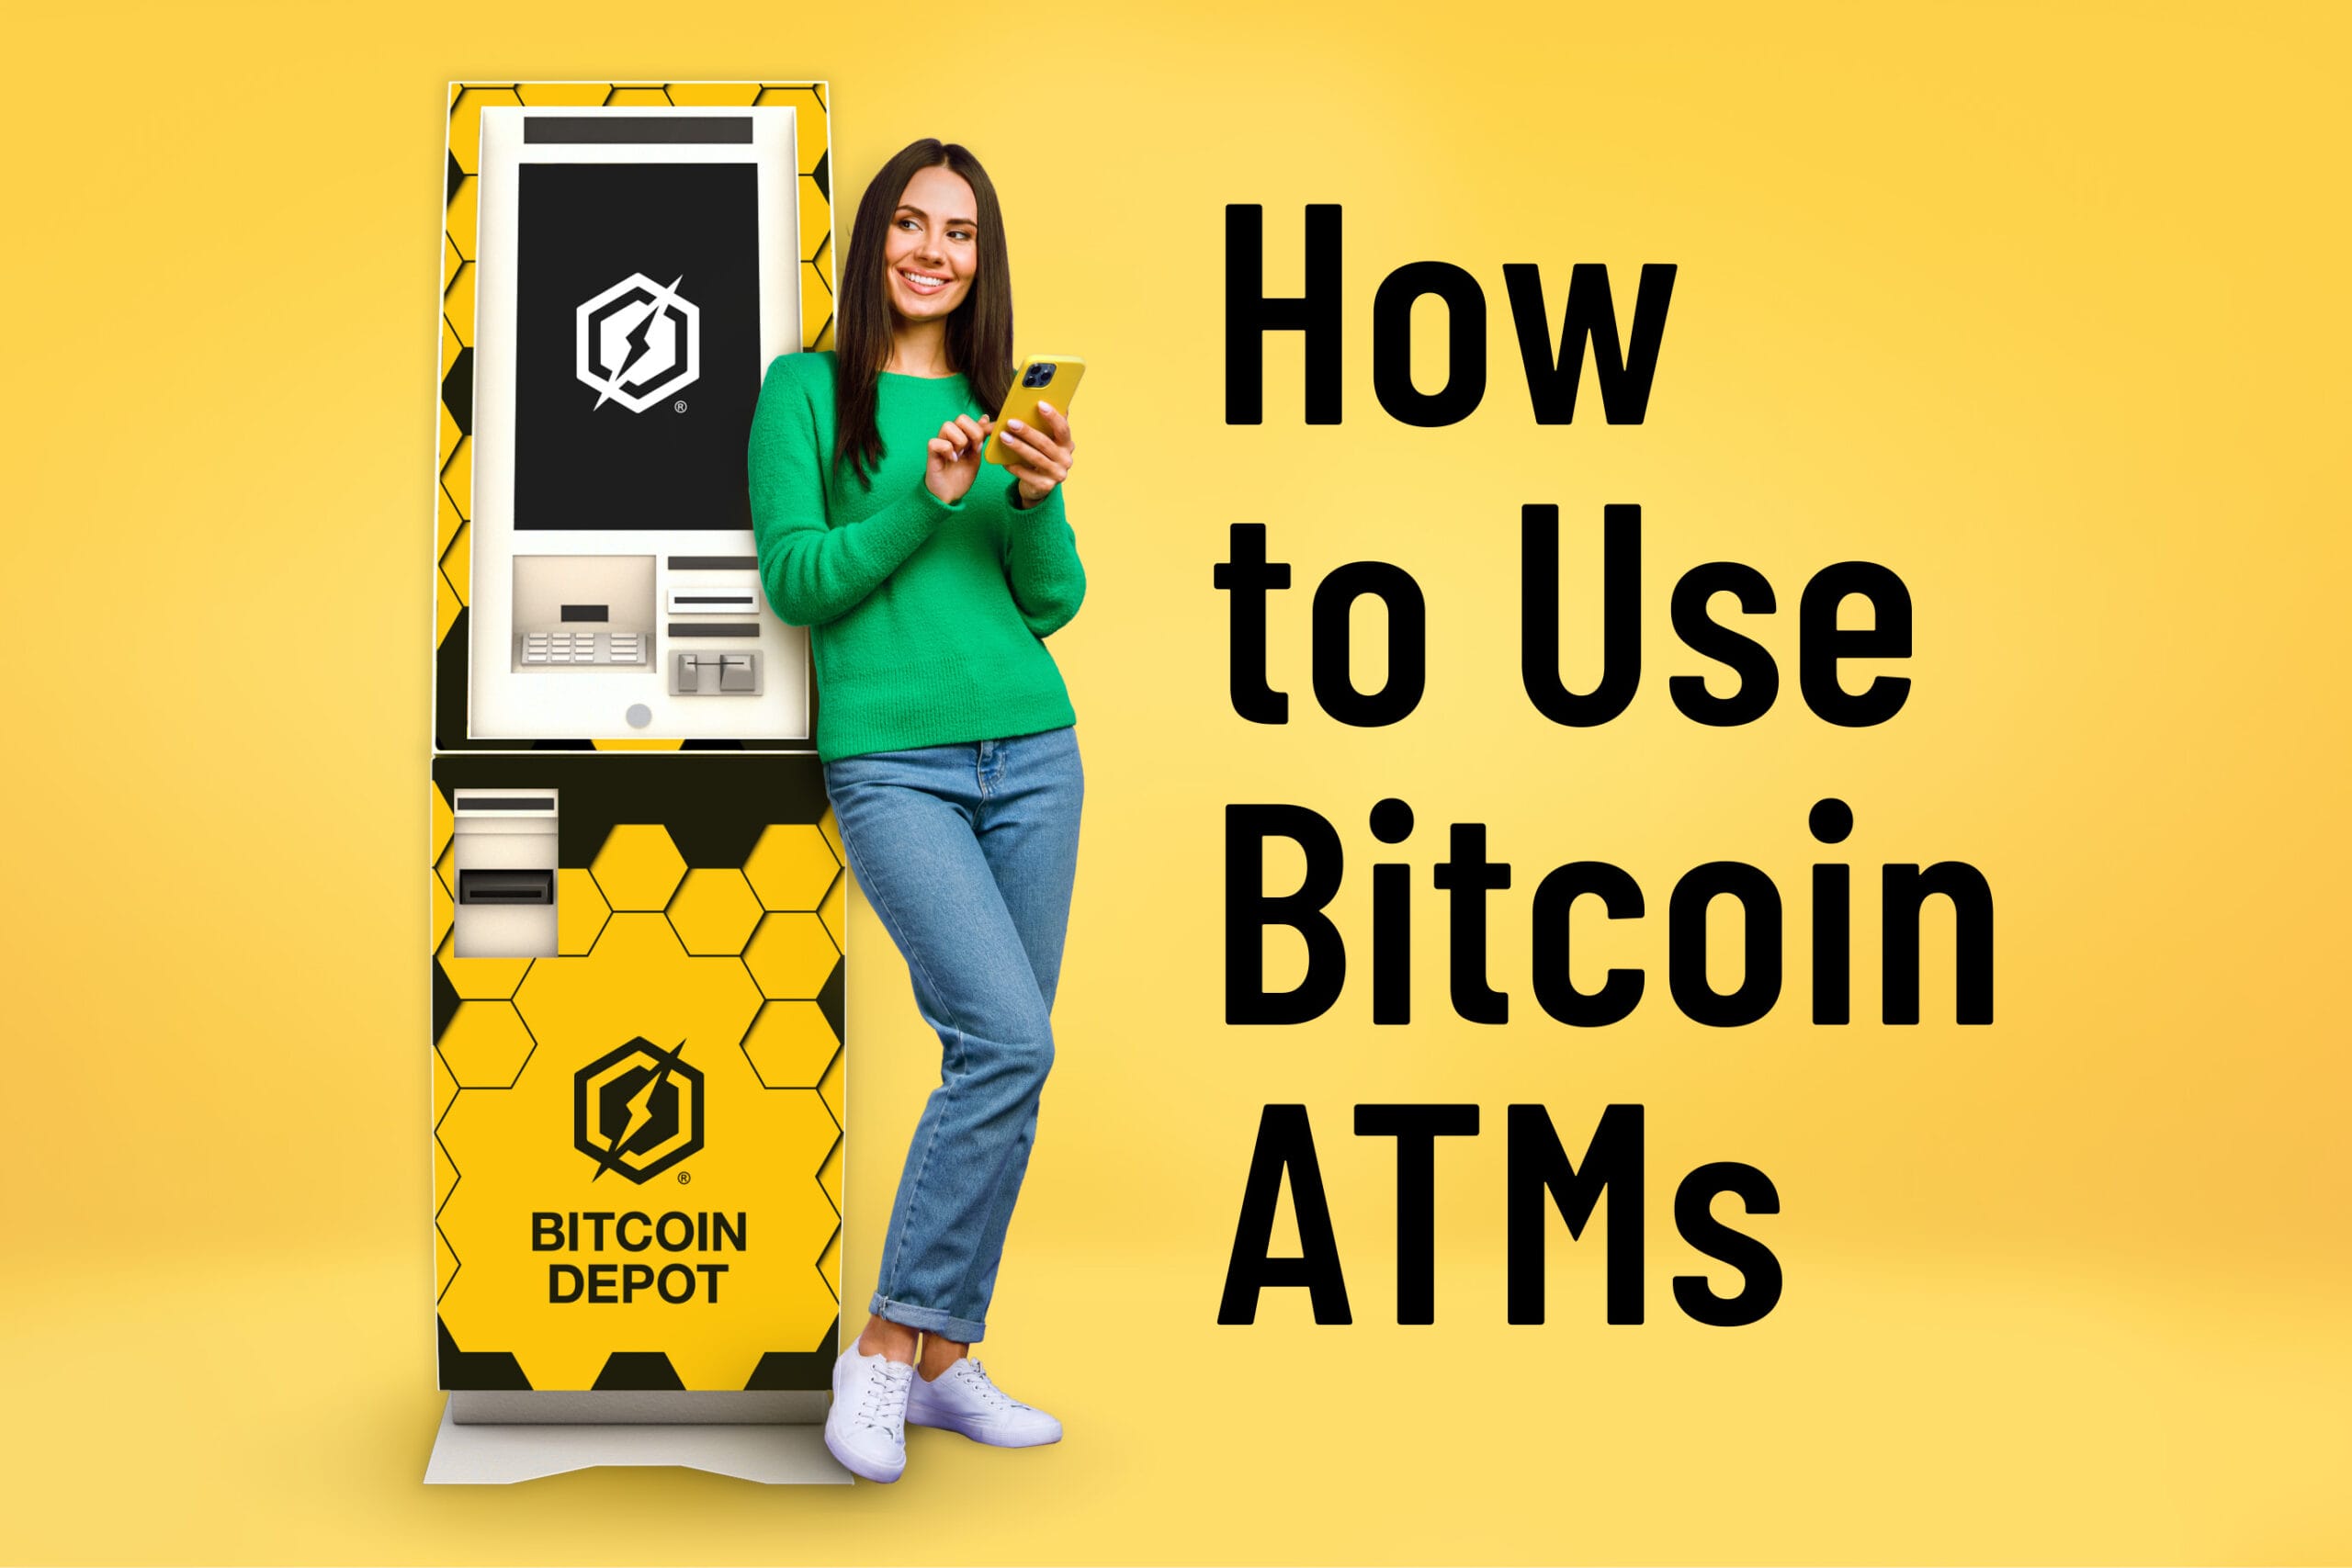 Woman in green shirt and jeans leaning against BTM with How to Use Bitcoin ATMs title